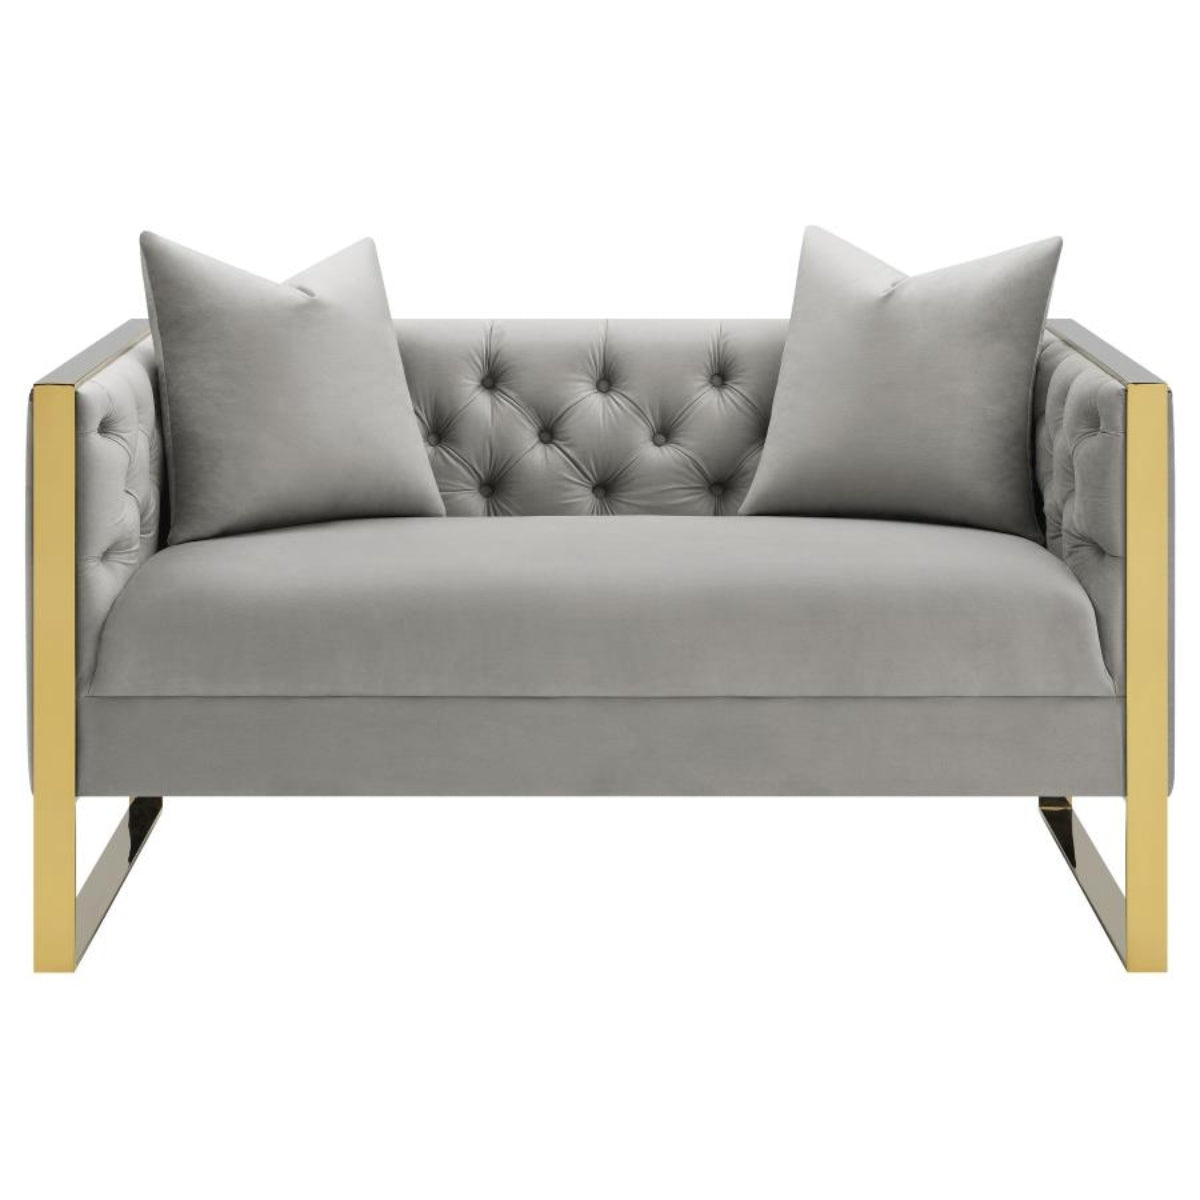 Living Room Set (Sofa and Loveseat) in Grey